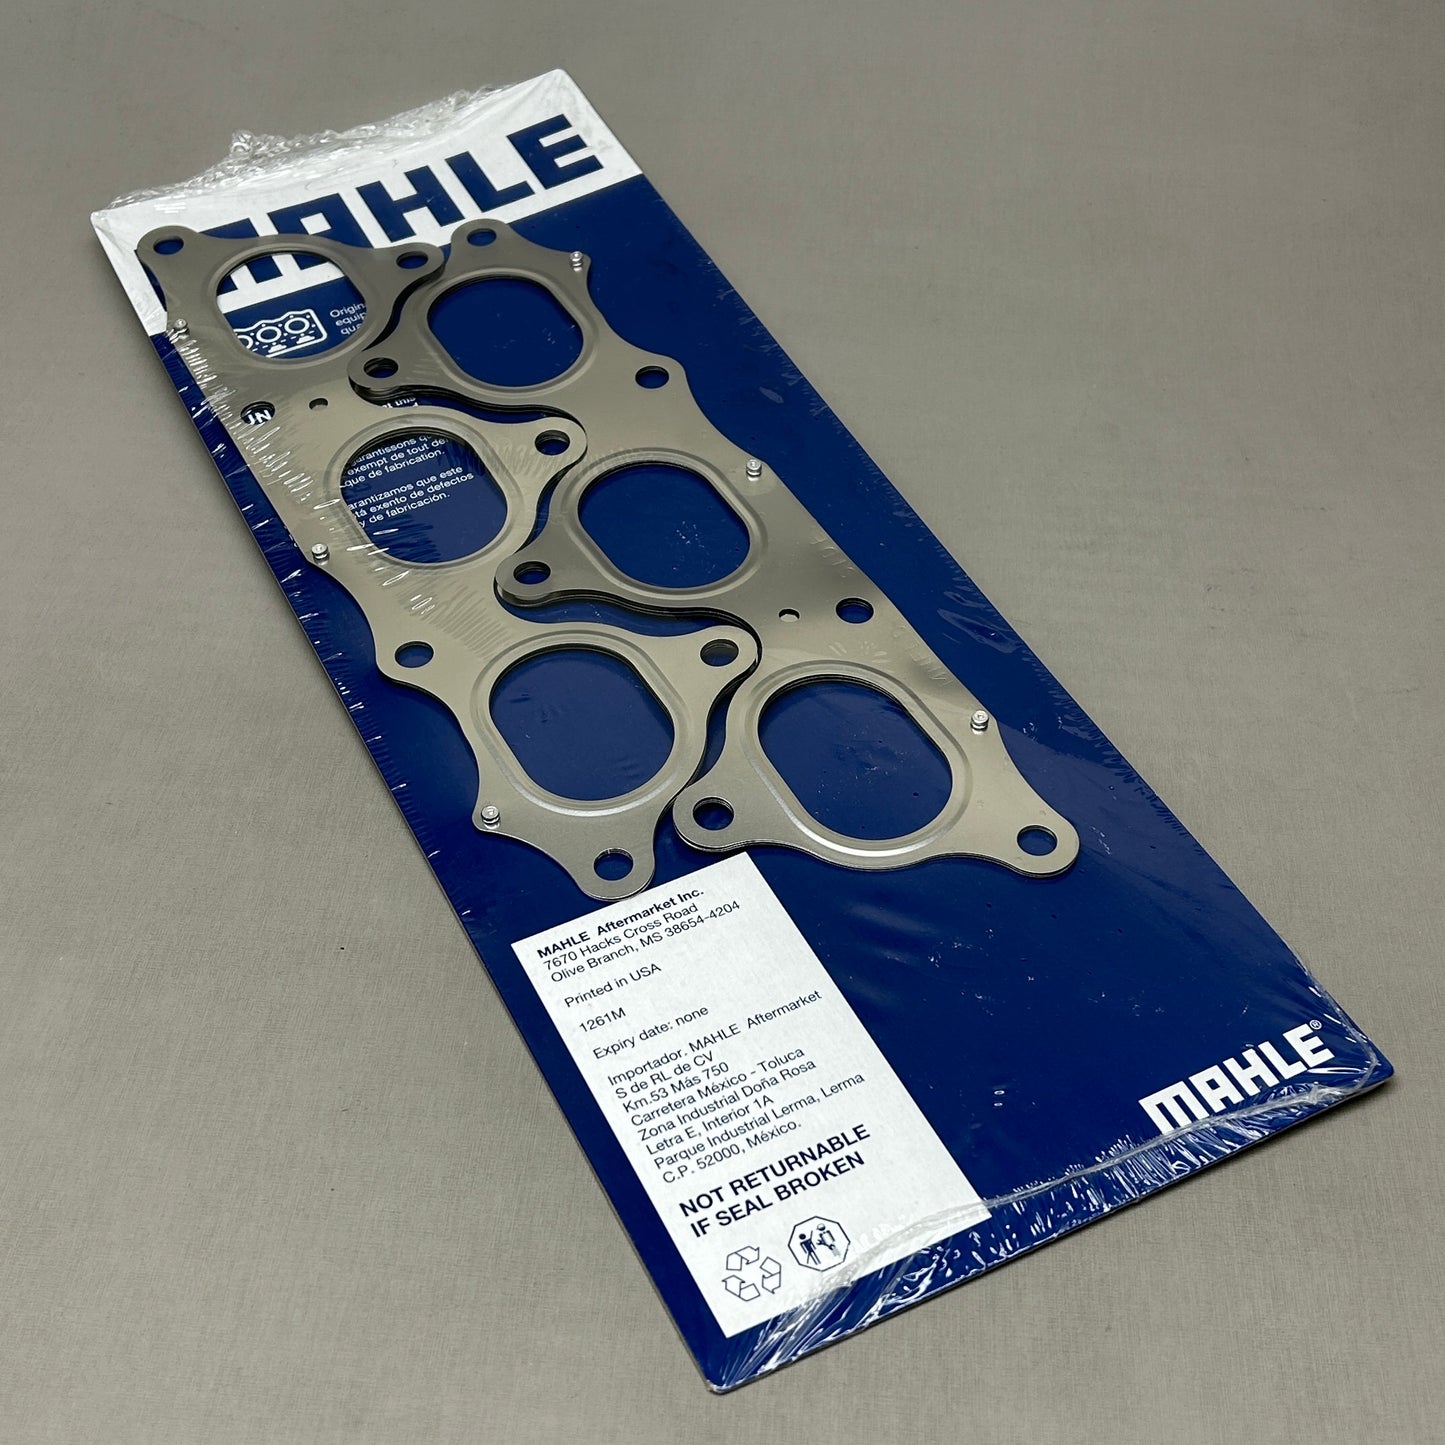 MAHLE Exhaust Manifold Gasket for Acura Honda MS19319 (New)